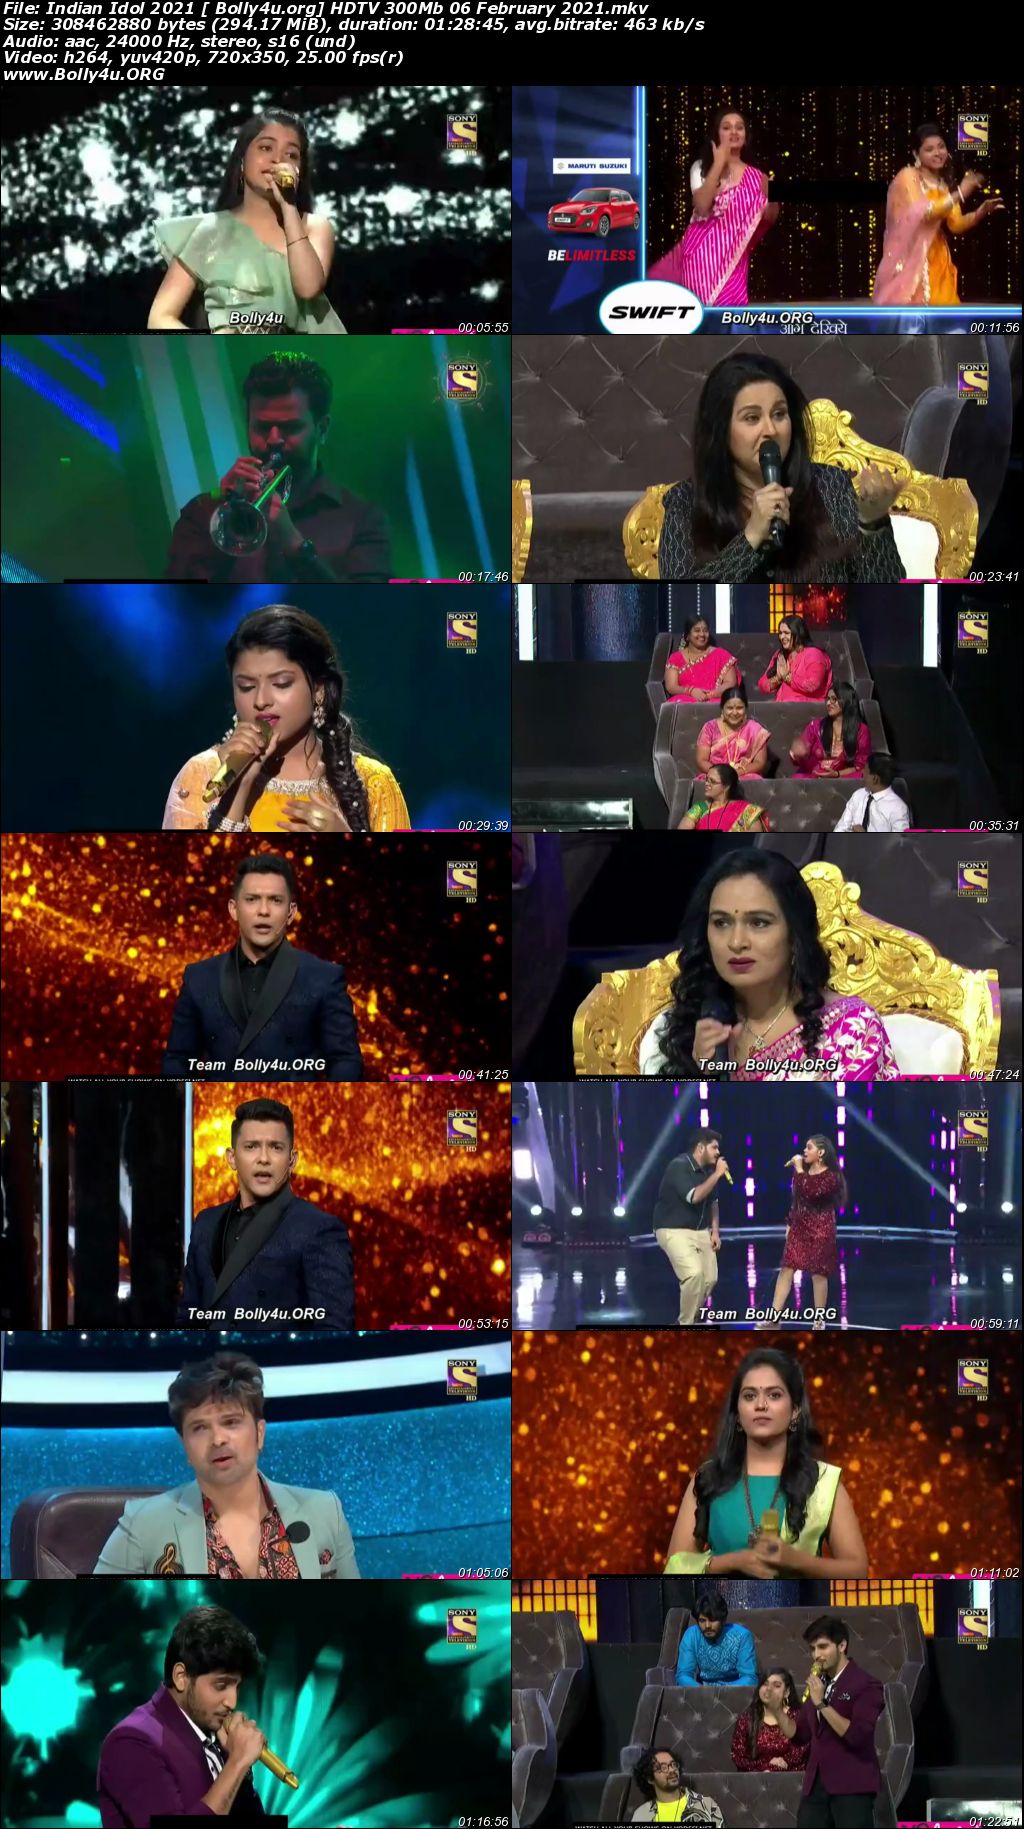 Indian Idol 2021 HDTV 480p 300Mb 06 February 2021 Download